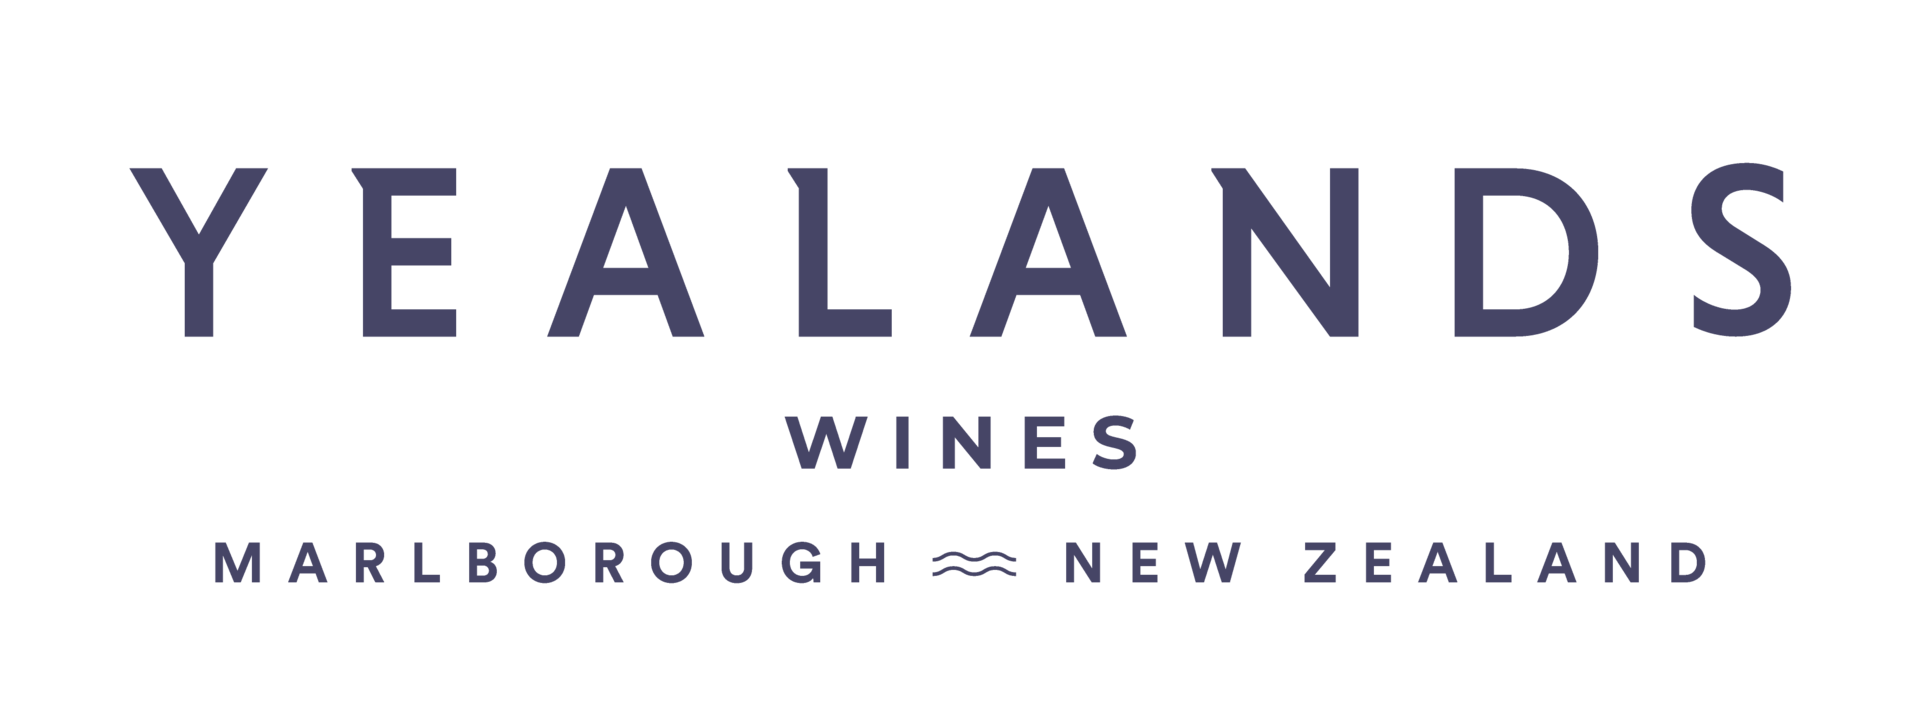 Yealands_Wines_Prov_Blue.png